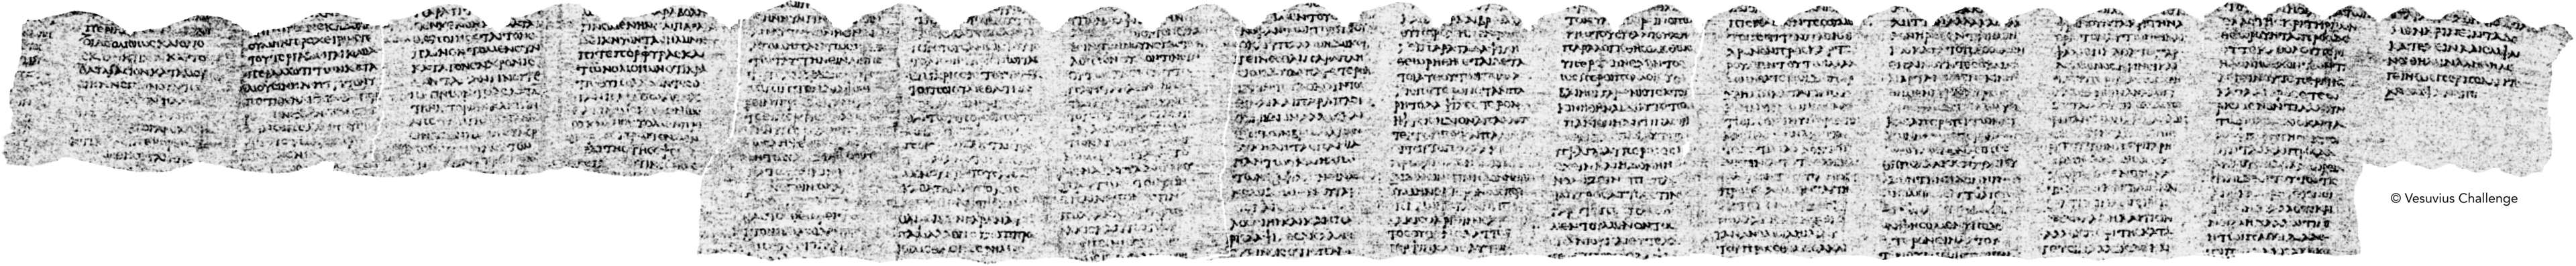 The result image produced by the Vesuvius Challenge Grand Prize winning team of Youssef Nader, Luke Farritor, and Julian Schilliger. 15 columns of Greek text are revealed, and are shown on top of the papyrus sheet they are written on.